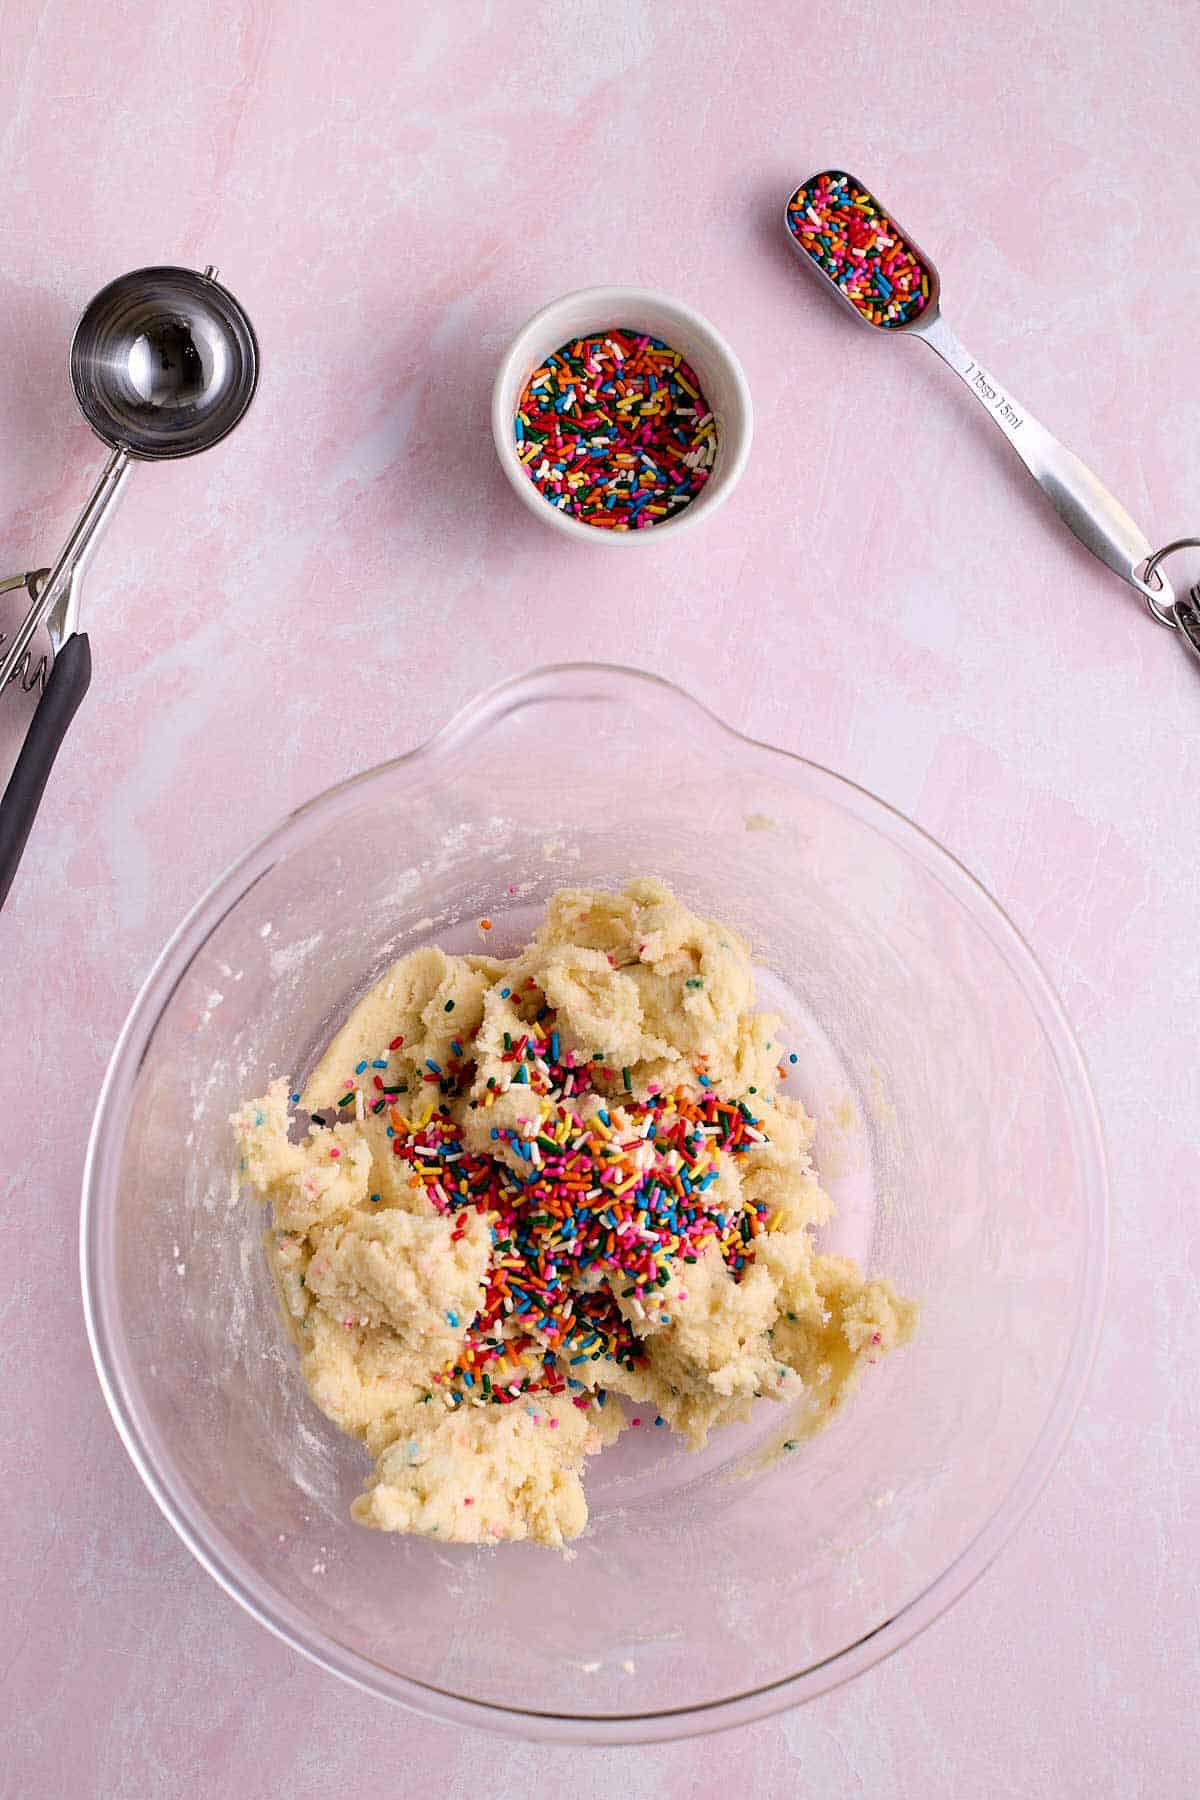 Funfetti cake mix cookie dough with more sprinkles added.